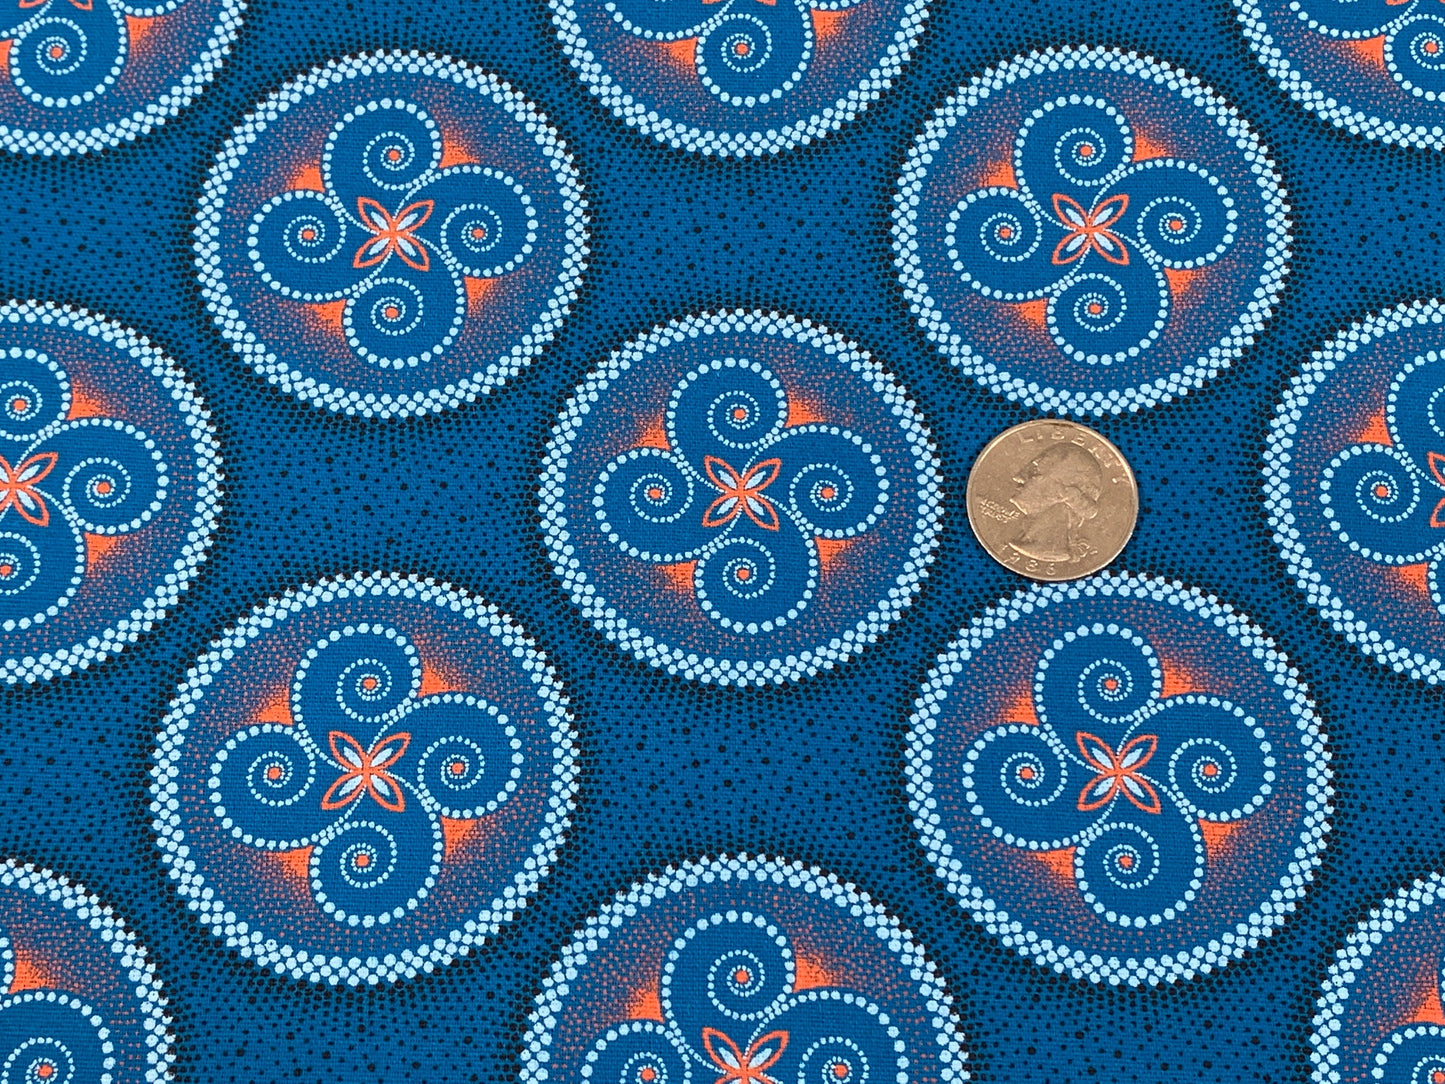 South African Shweshwe Fabric by the YARD. Da Gama Three Cats Turquoise & Orange Circle Dance. 100% Cotton Print for Quilts, Apparel, Décor.